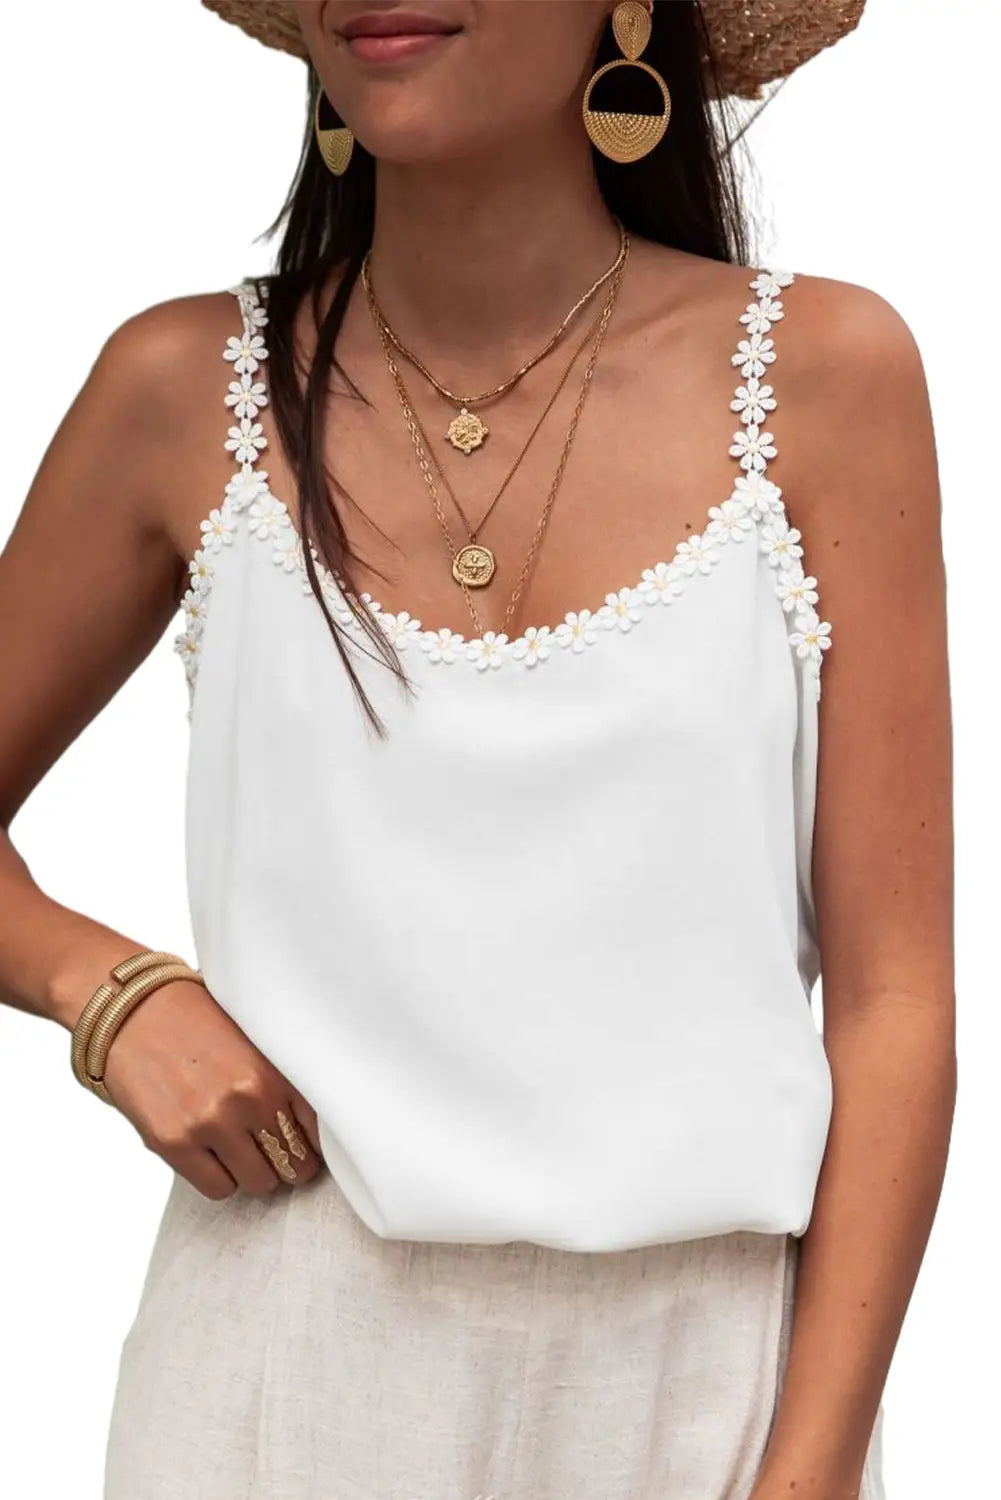 Daisy flower straps tank top - tops